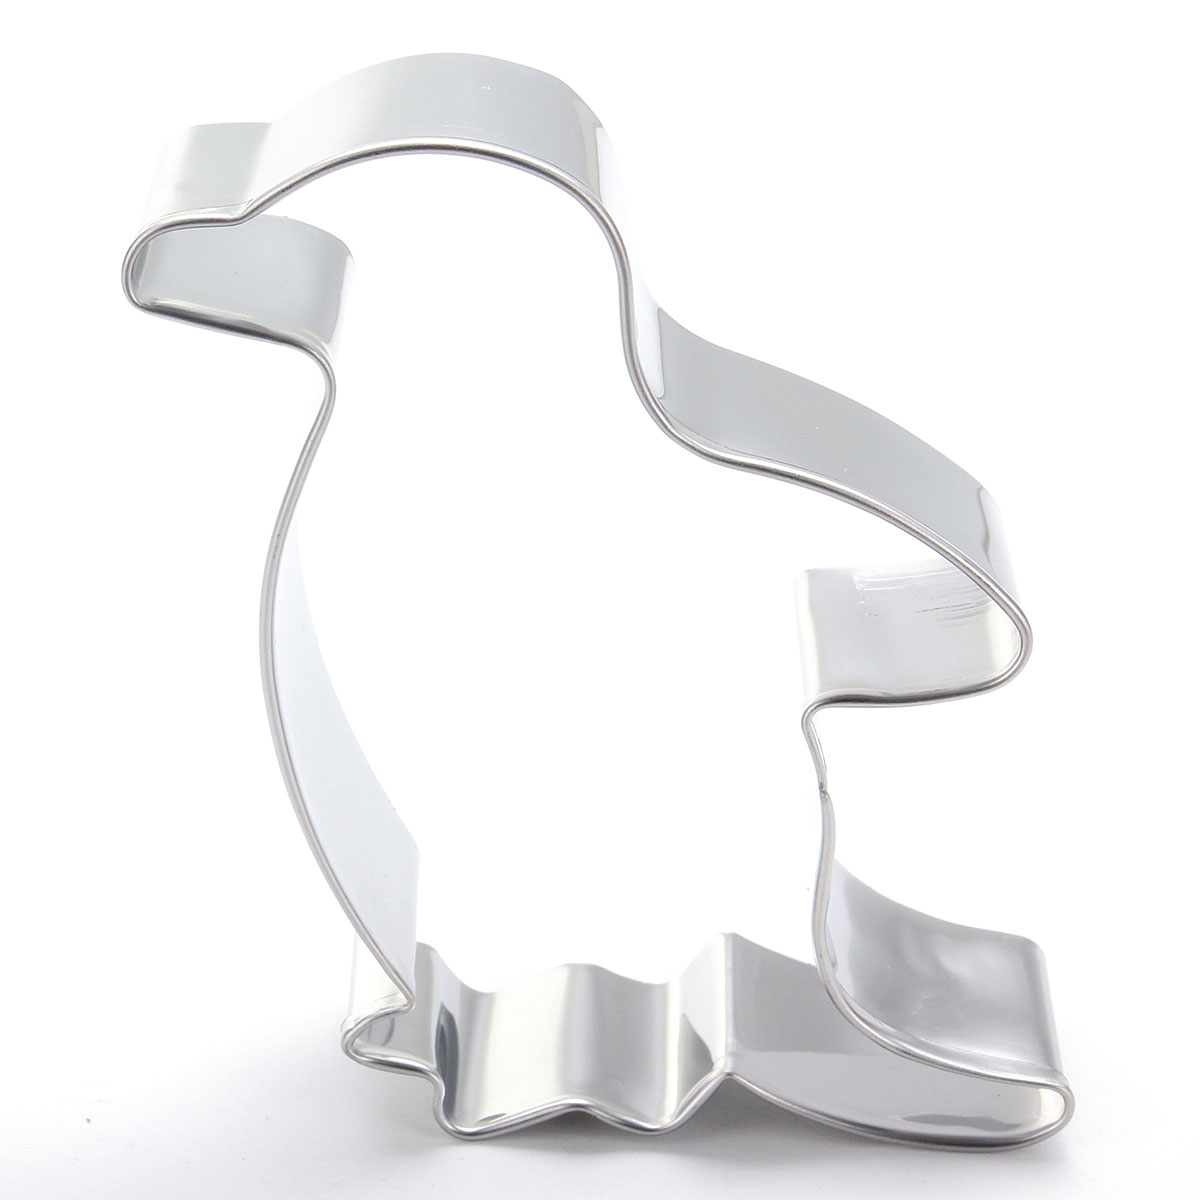 

Stainless Steel Penguin Shaped Cake Decorating Cookie Cutter Biscuit Tools Mould